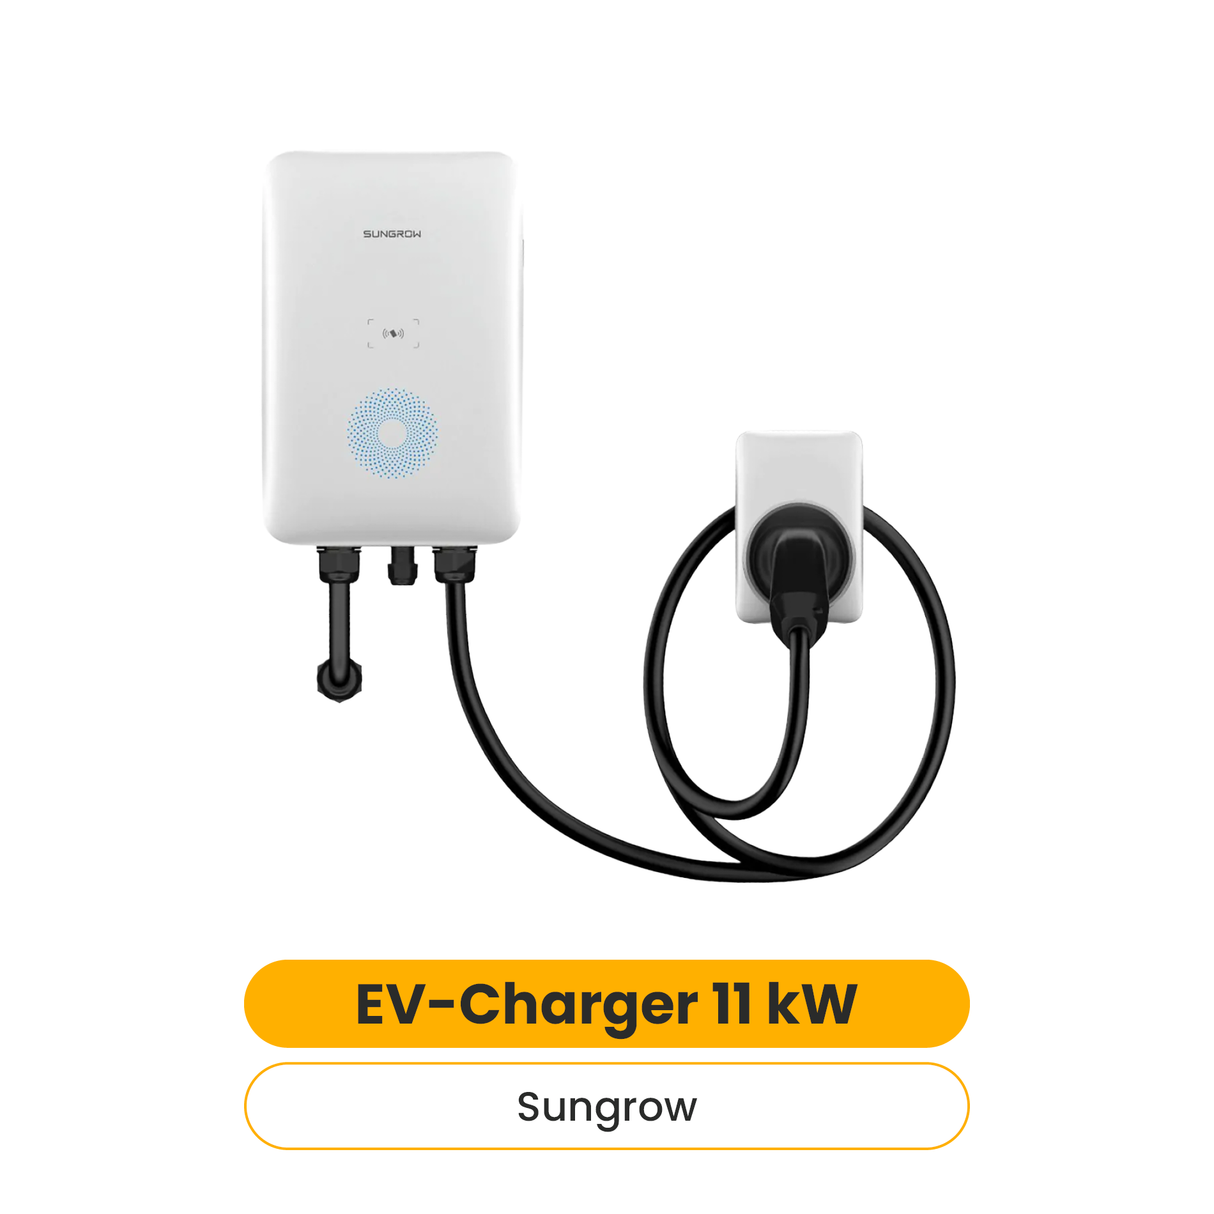 Sungrow EV-Charger 11kW